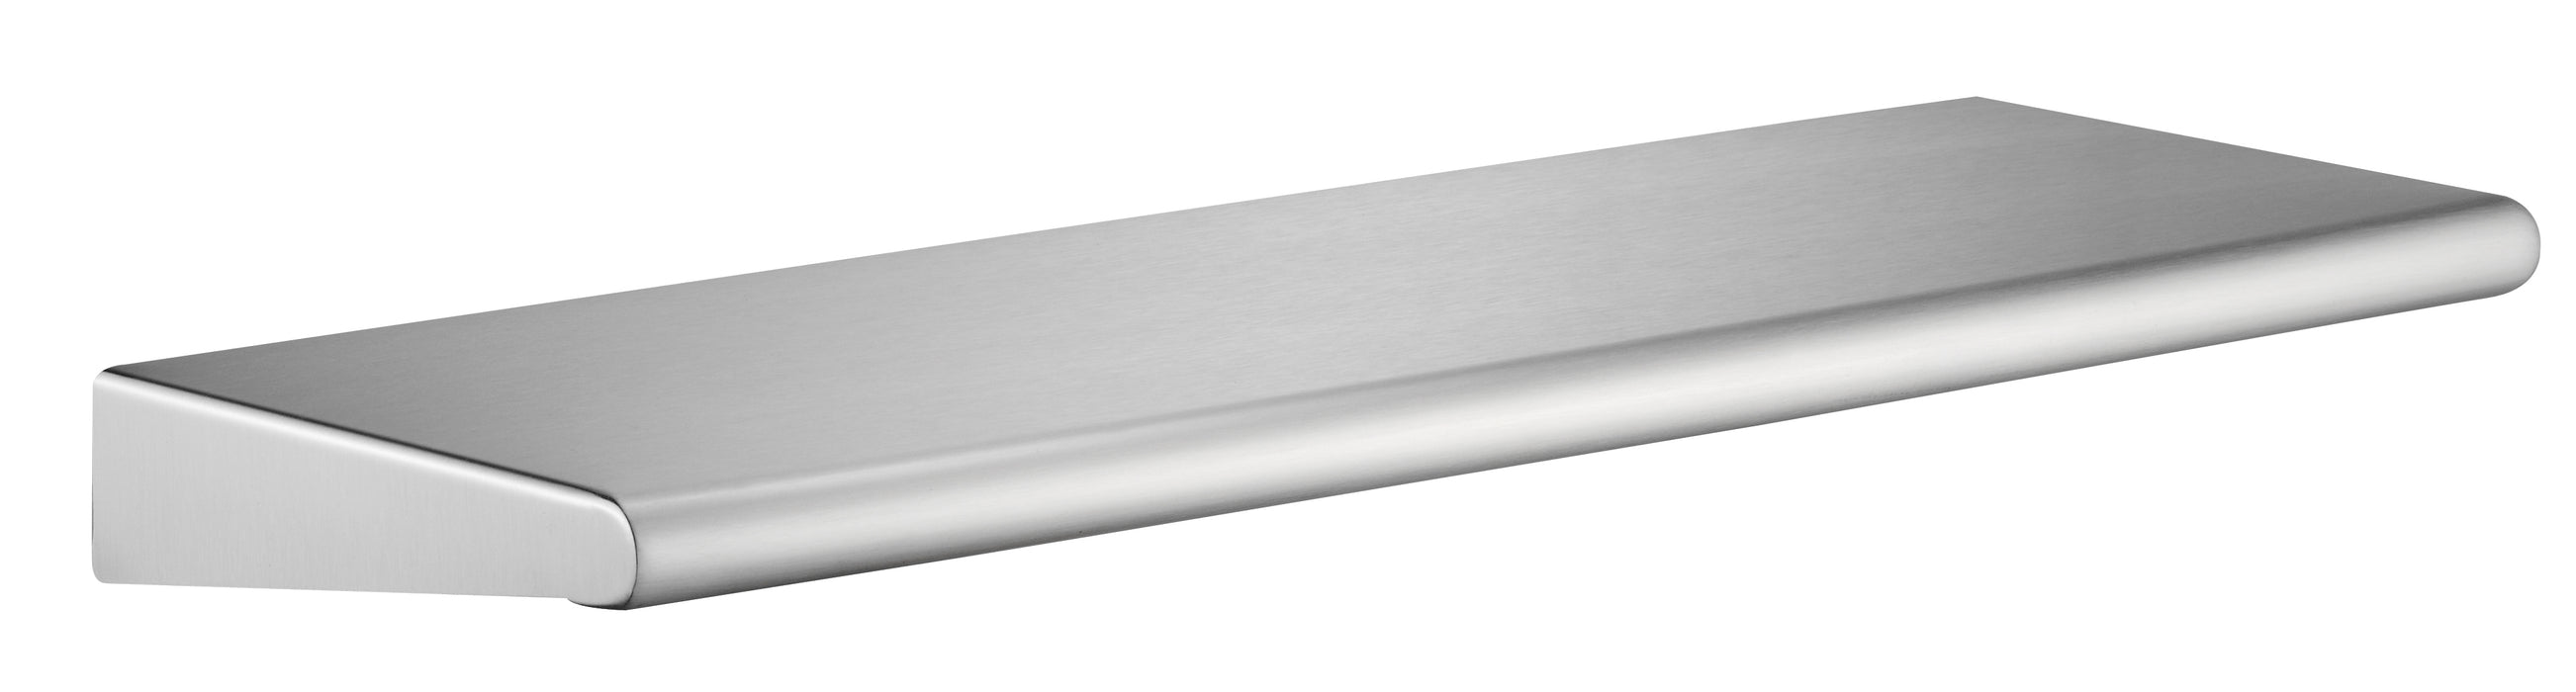 ASI 20692-660 Surface Mounted Shelf, Stainless Steel, 6 X 60 Inch